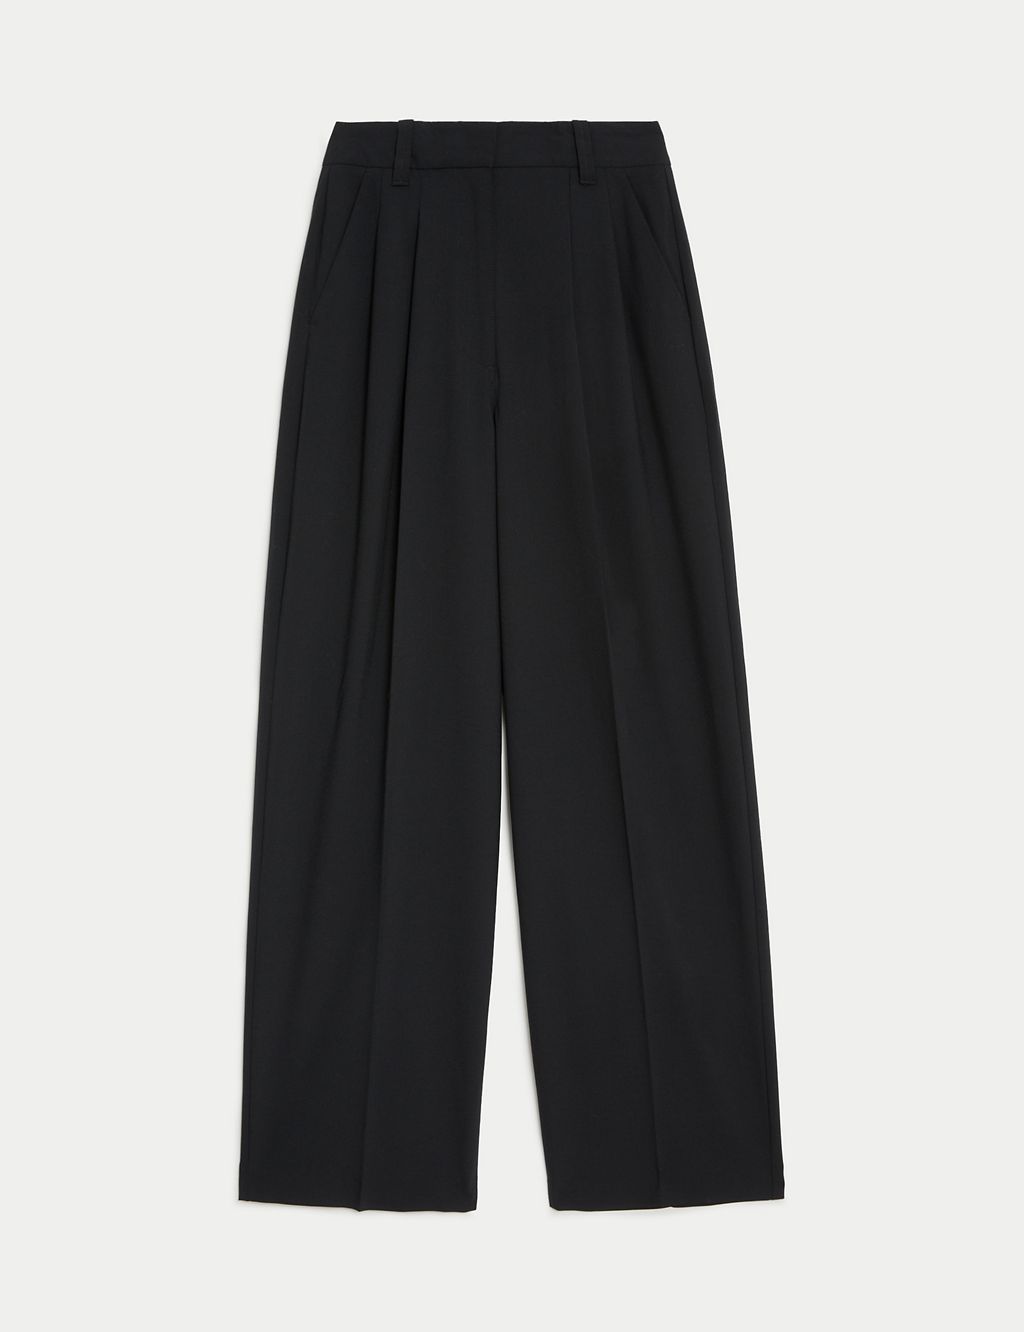 Wool Blend Pleat Front Wide Leg Trousers | M&S Collection | M&S